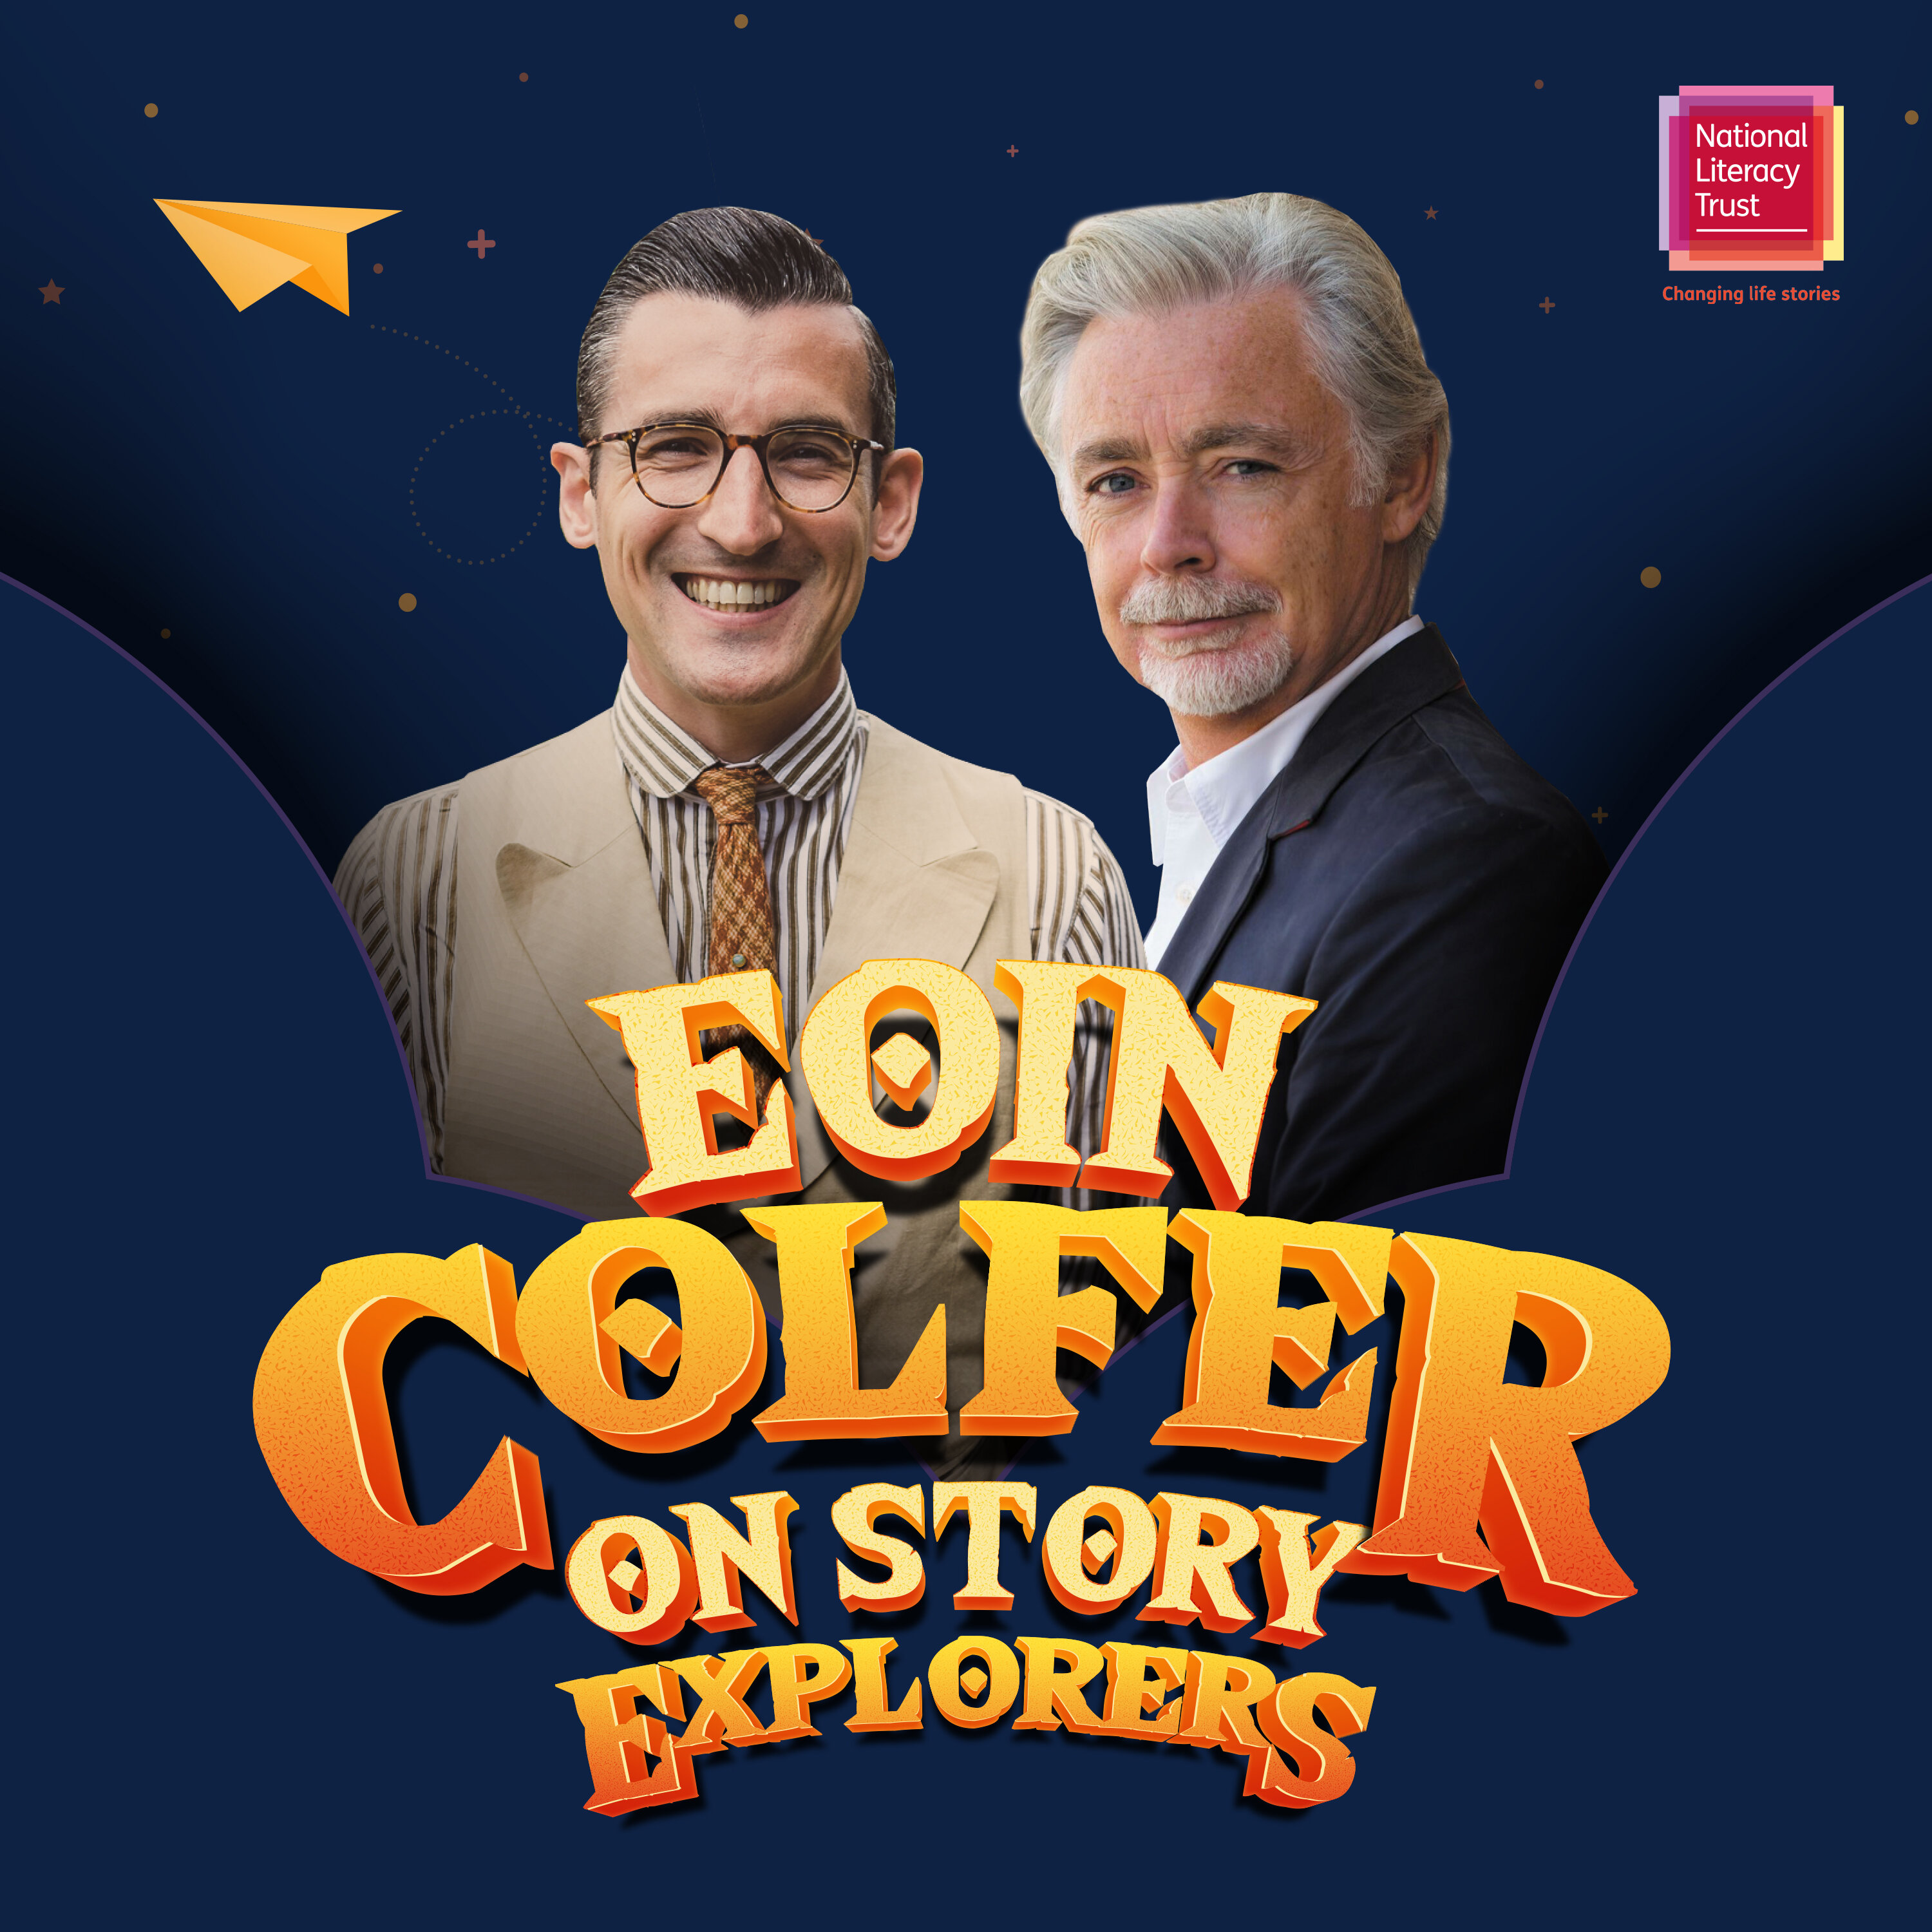 Eoin Colfer, author of  the Artemis Fowl series